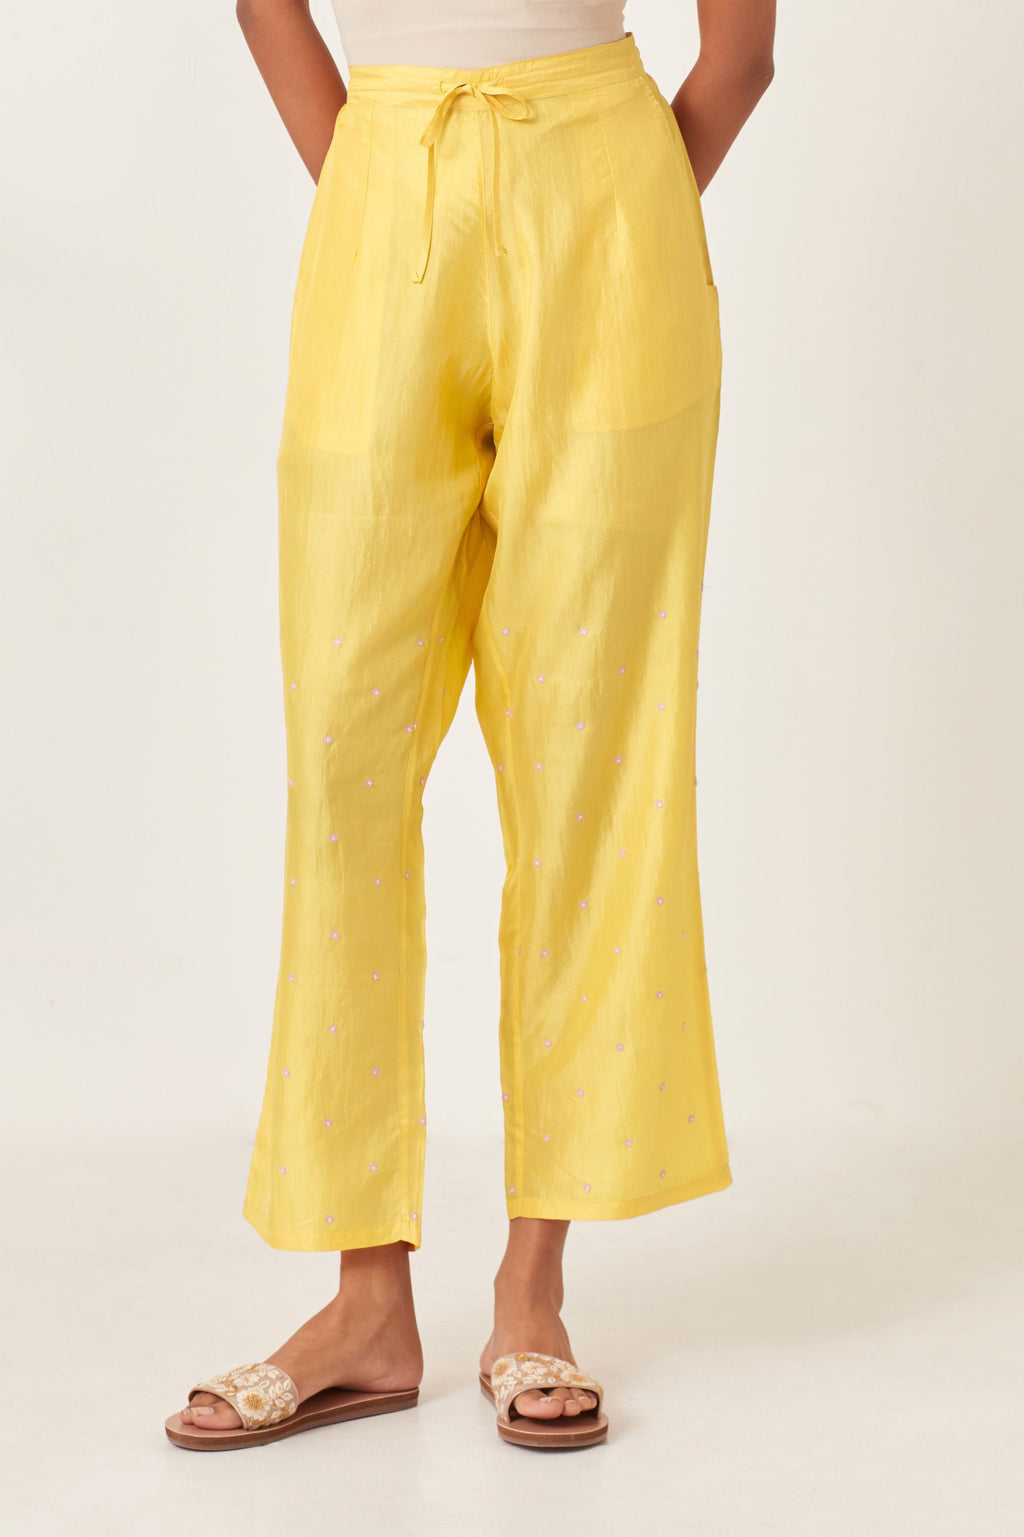 Yellow silk straight pants detailed with small flower embroidery at bottom.